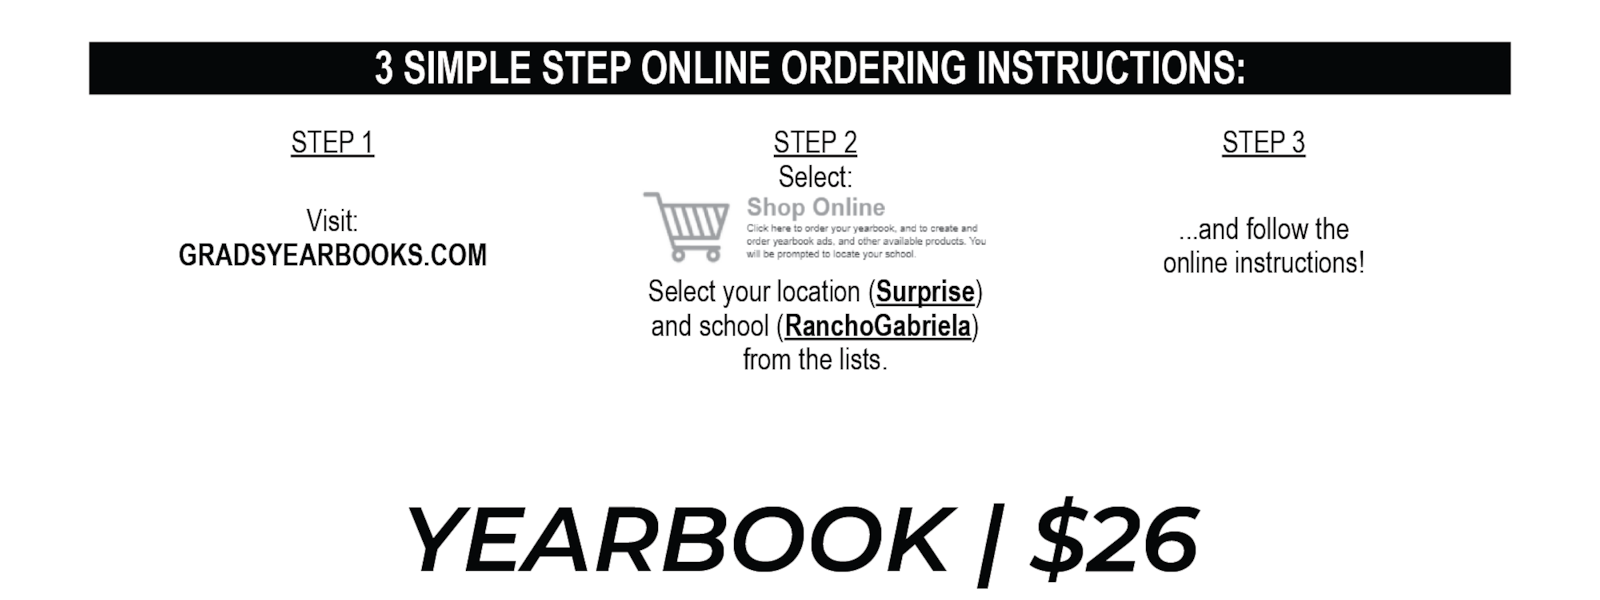 Order today in 3 easy steps